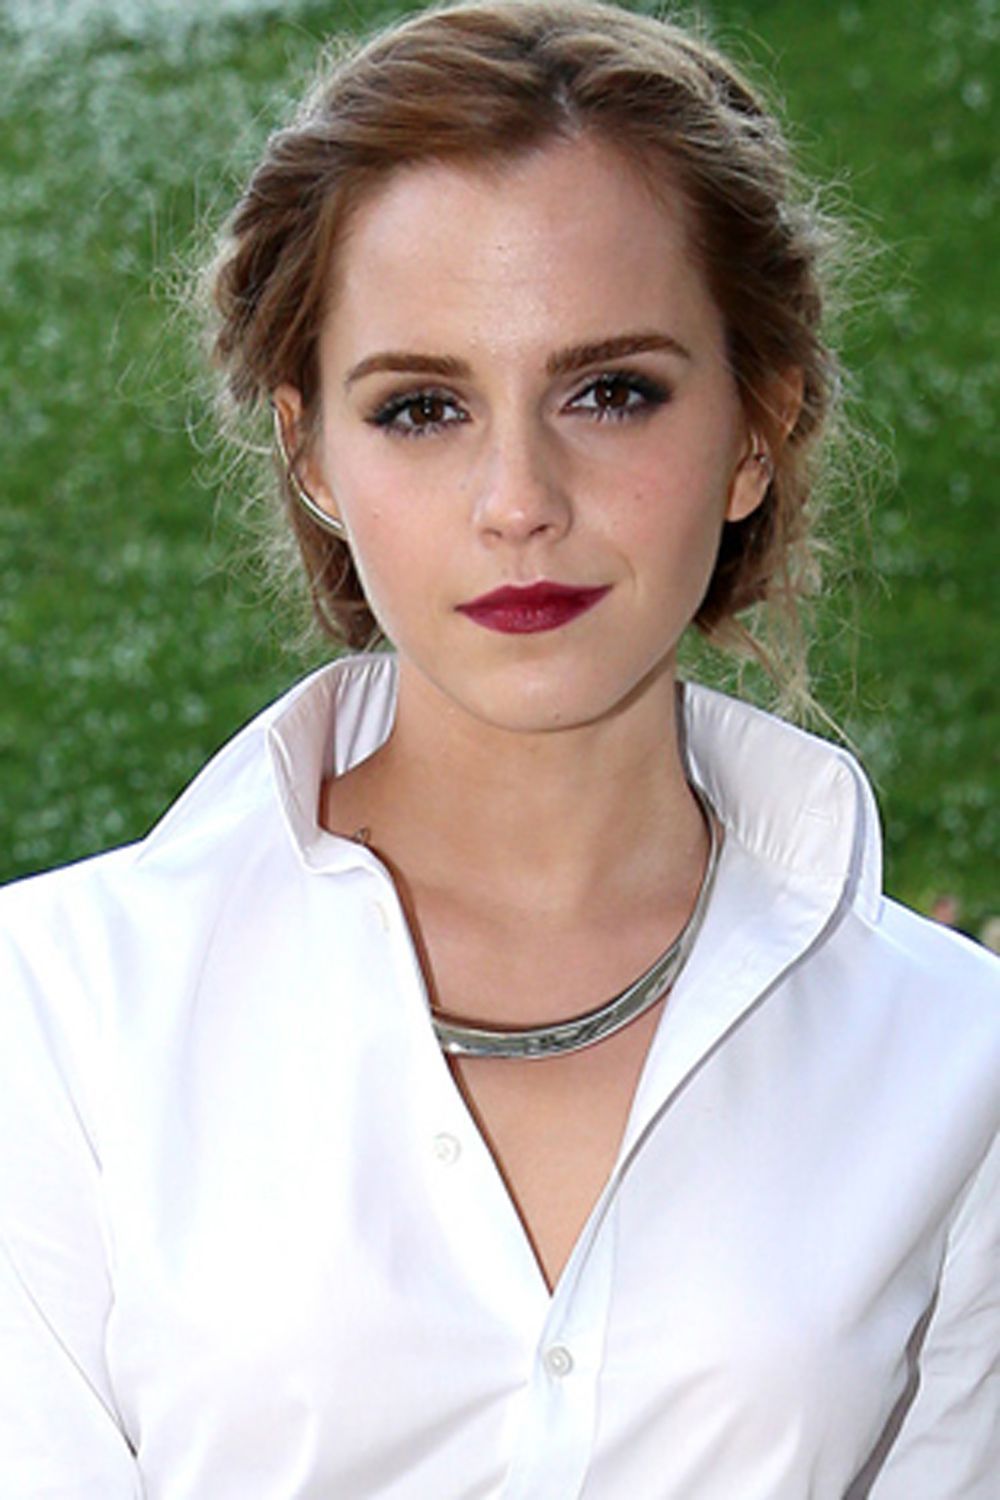 Hair Updos That Are So Chic They'll Work For Any Occasion -   23 emma watson updo
 ideas